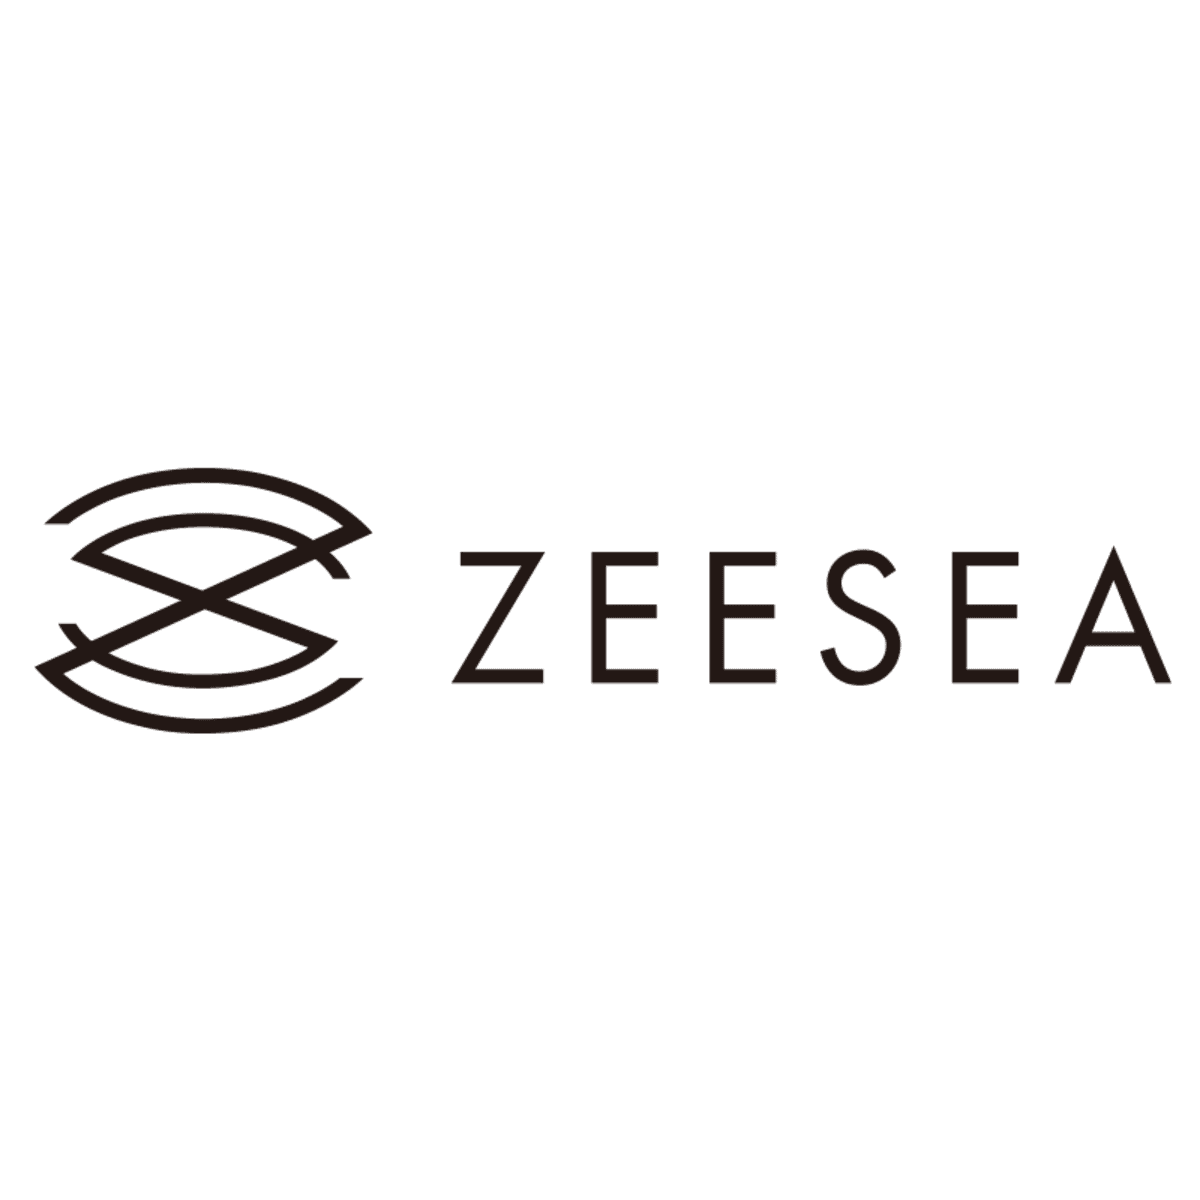 ZEESEA promos and coupon codes